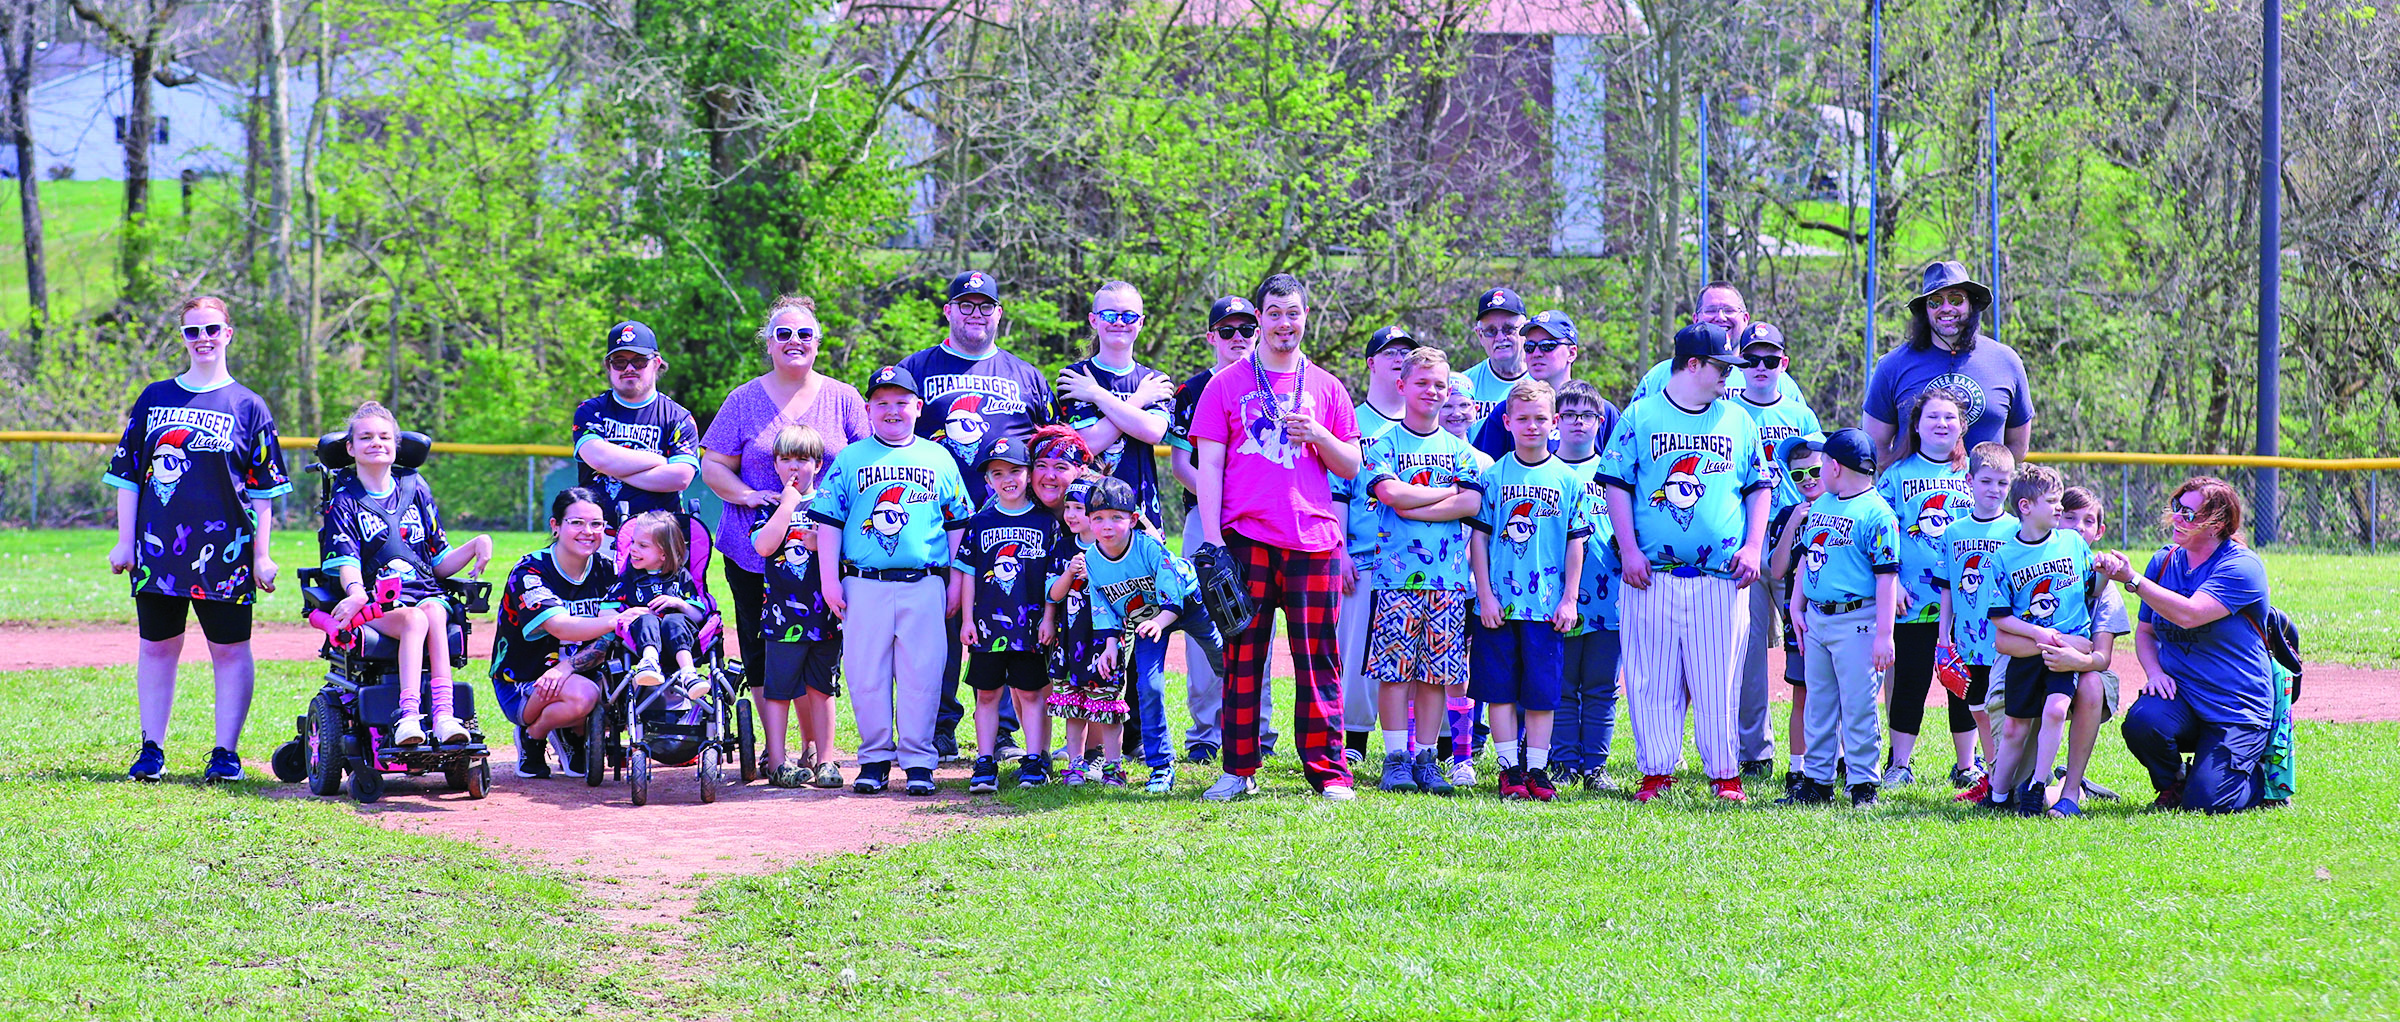 A Home Run for Inclusion  Challenger League Celebrates Its 25th Anniversary